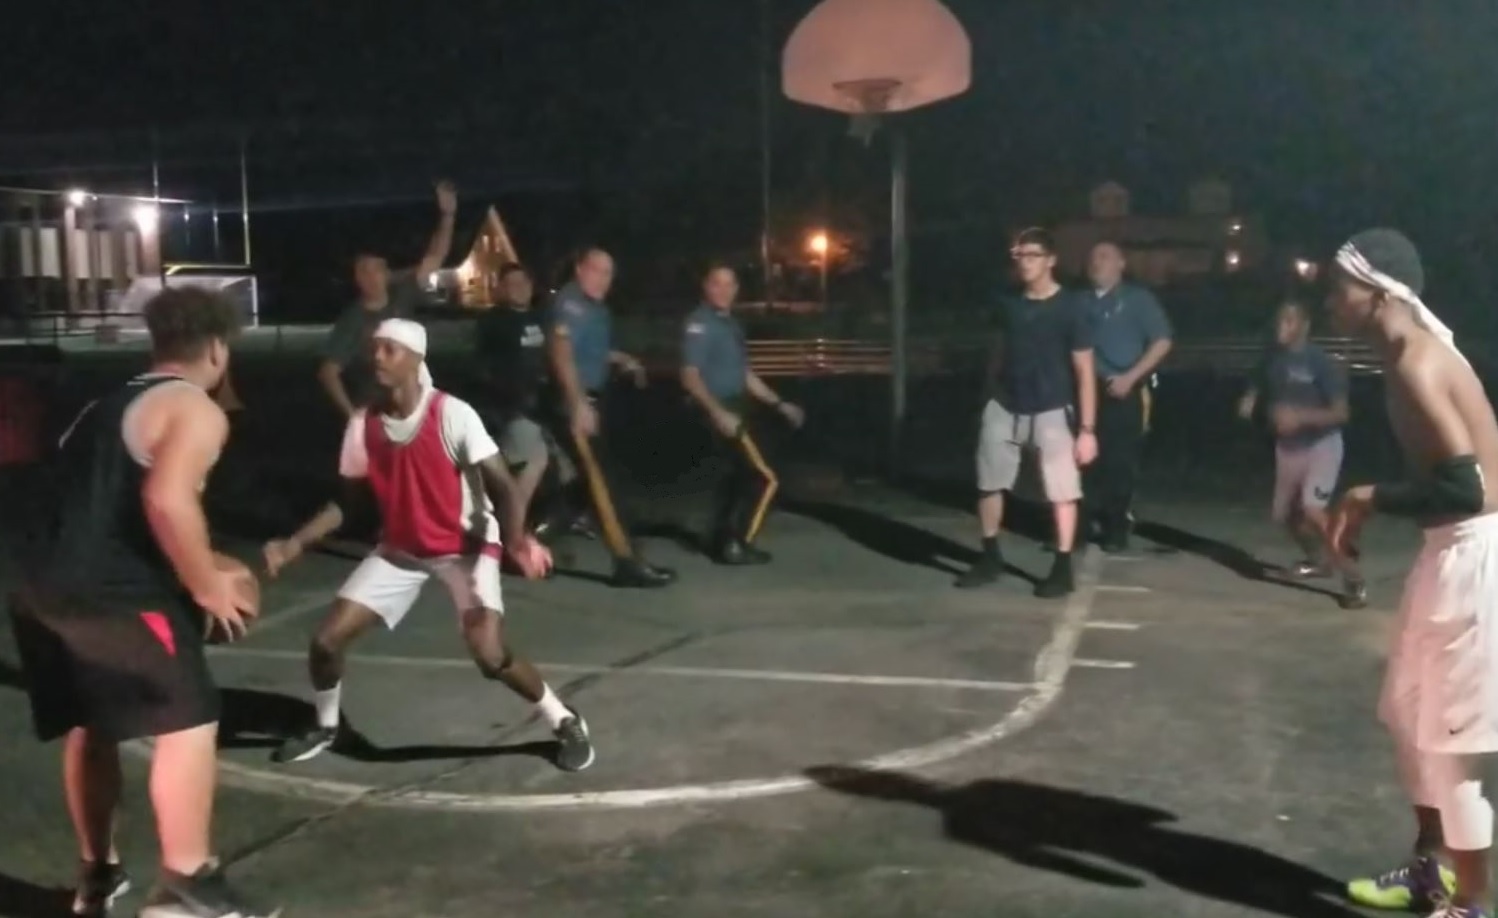 PHOTO: Pompton Lakes (NJ) police officers join in a pick-up basketball game between local youths, Sept. 23, 2019. 